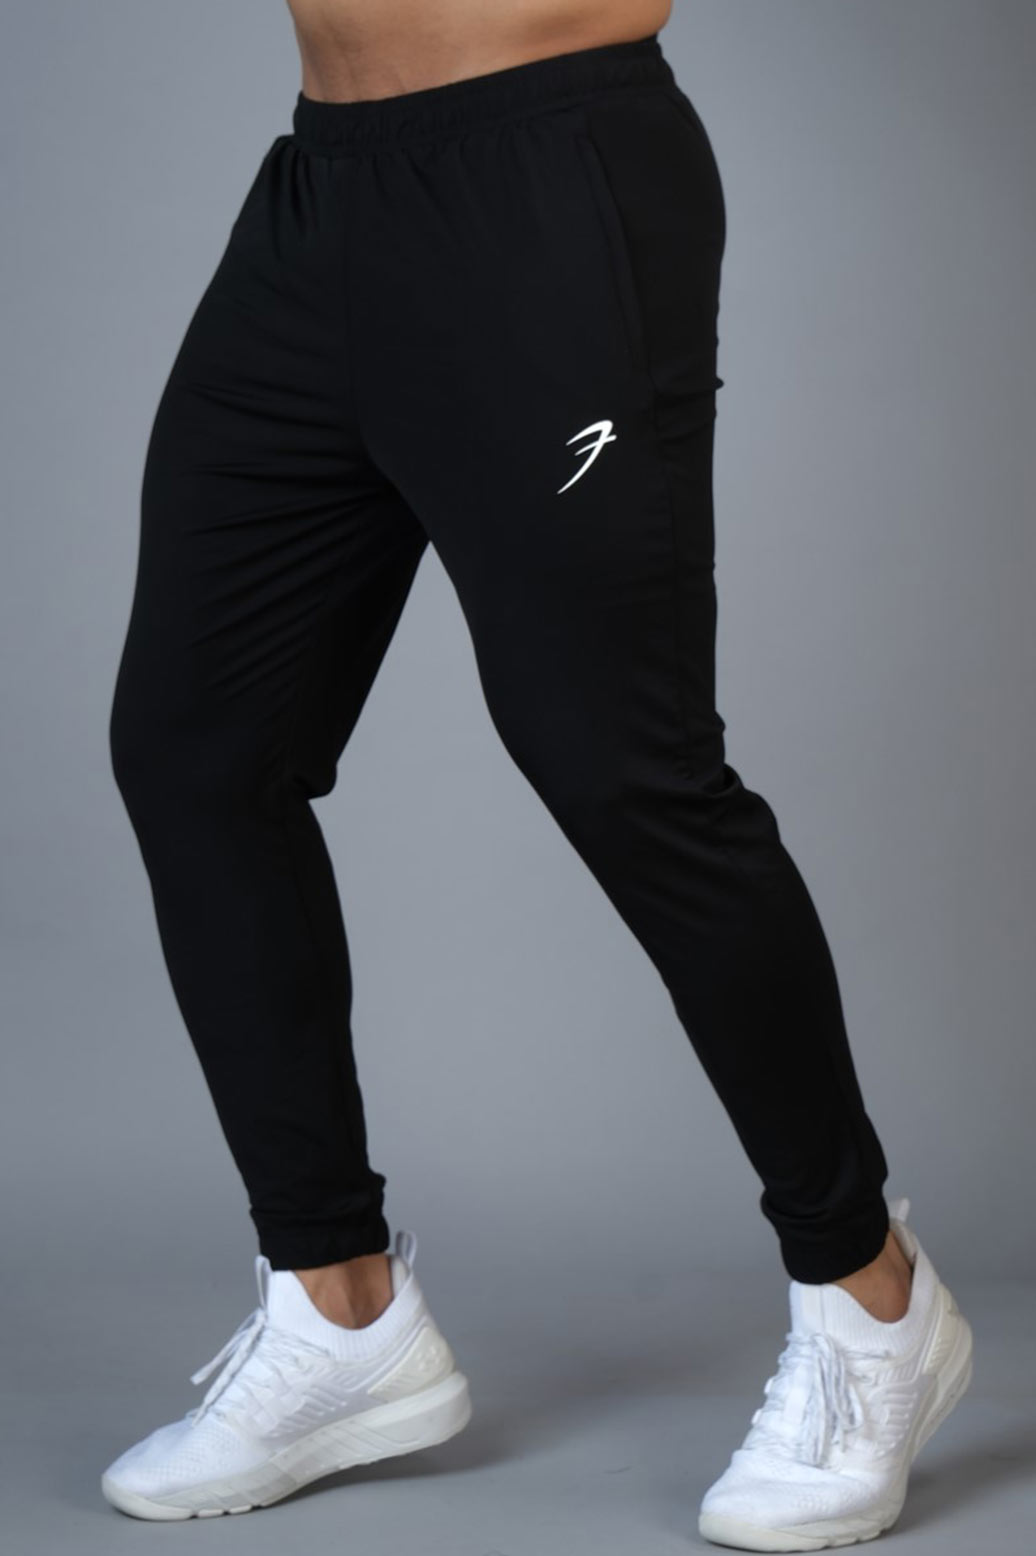 OFF-WHITE: Off White nylon jogging trousers with logo - Black | OFF-WHITE  pants OMCA086E20FAB002 online at GIGLIO.COM